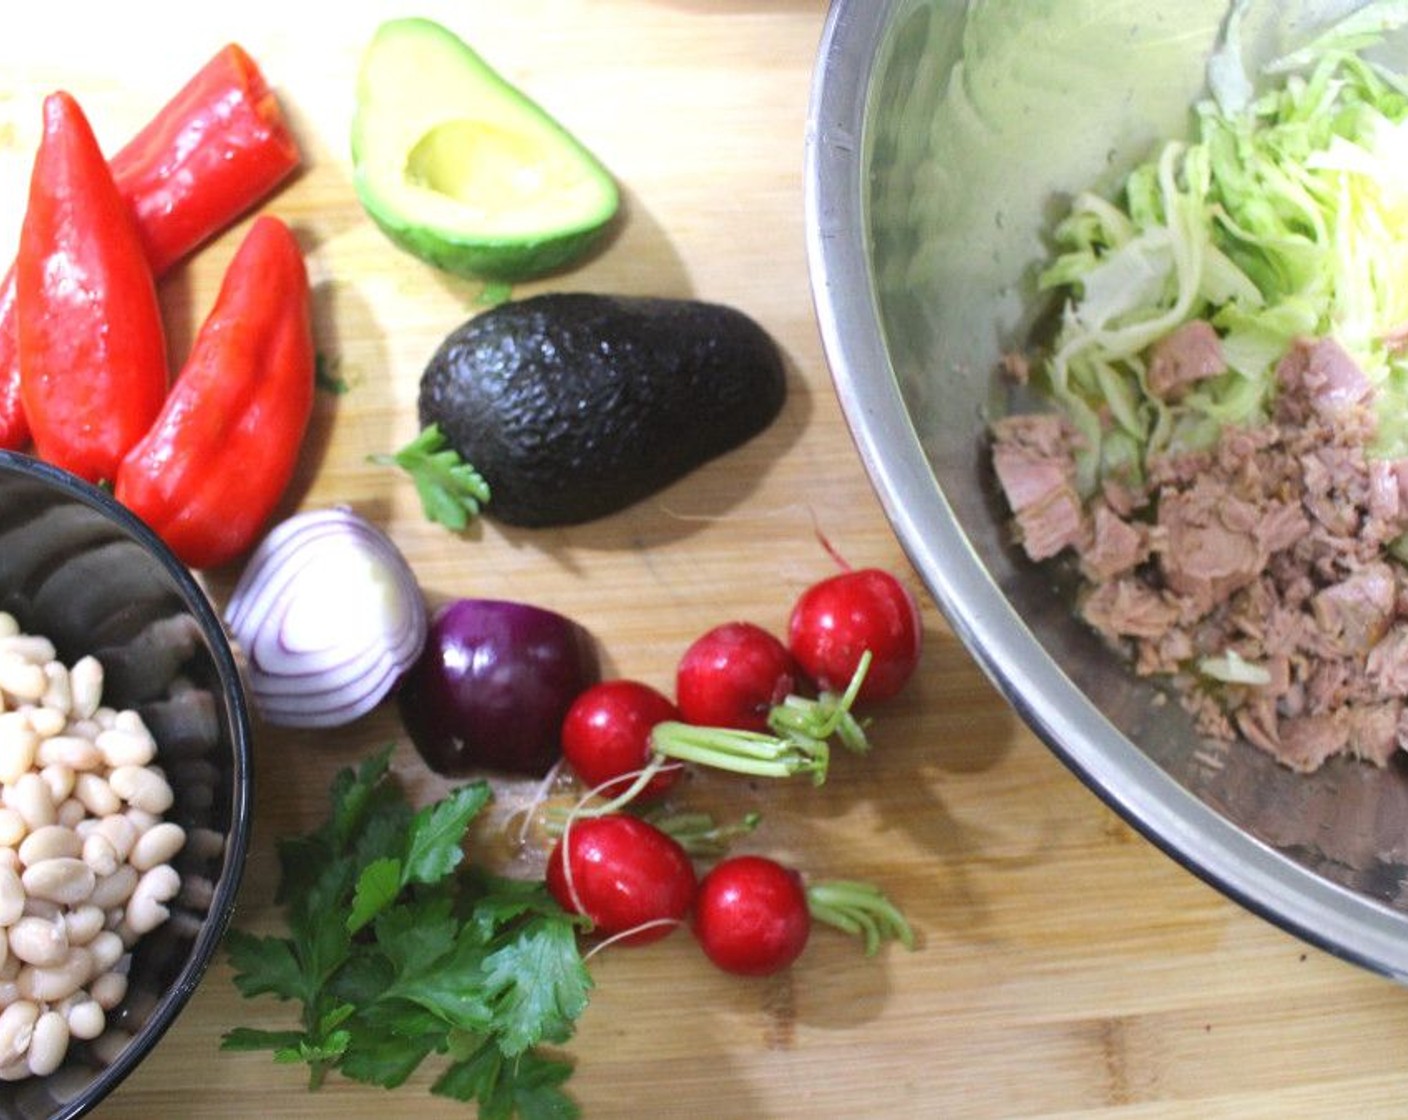 step 1 In a large bowl mix together Iceberg Lettuce (1 cup), White Beans (1 cup), Canned Tuna (1 cup), Avocado (1), Baby Red Radish (5), Fresh Cilantro (1/4 cup), and Red Onion (1).